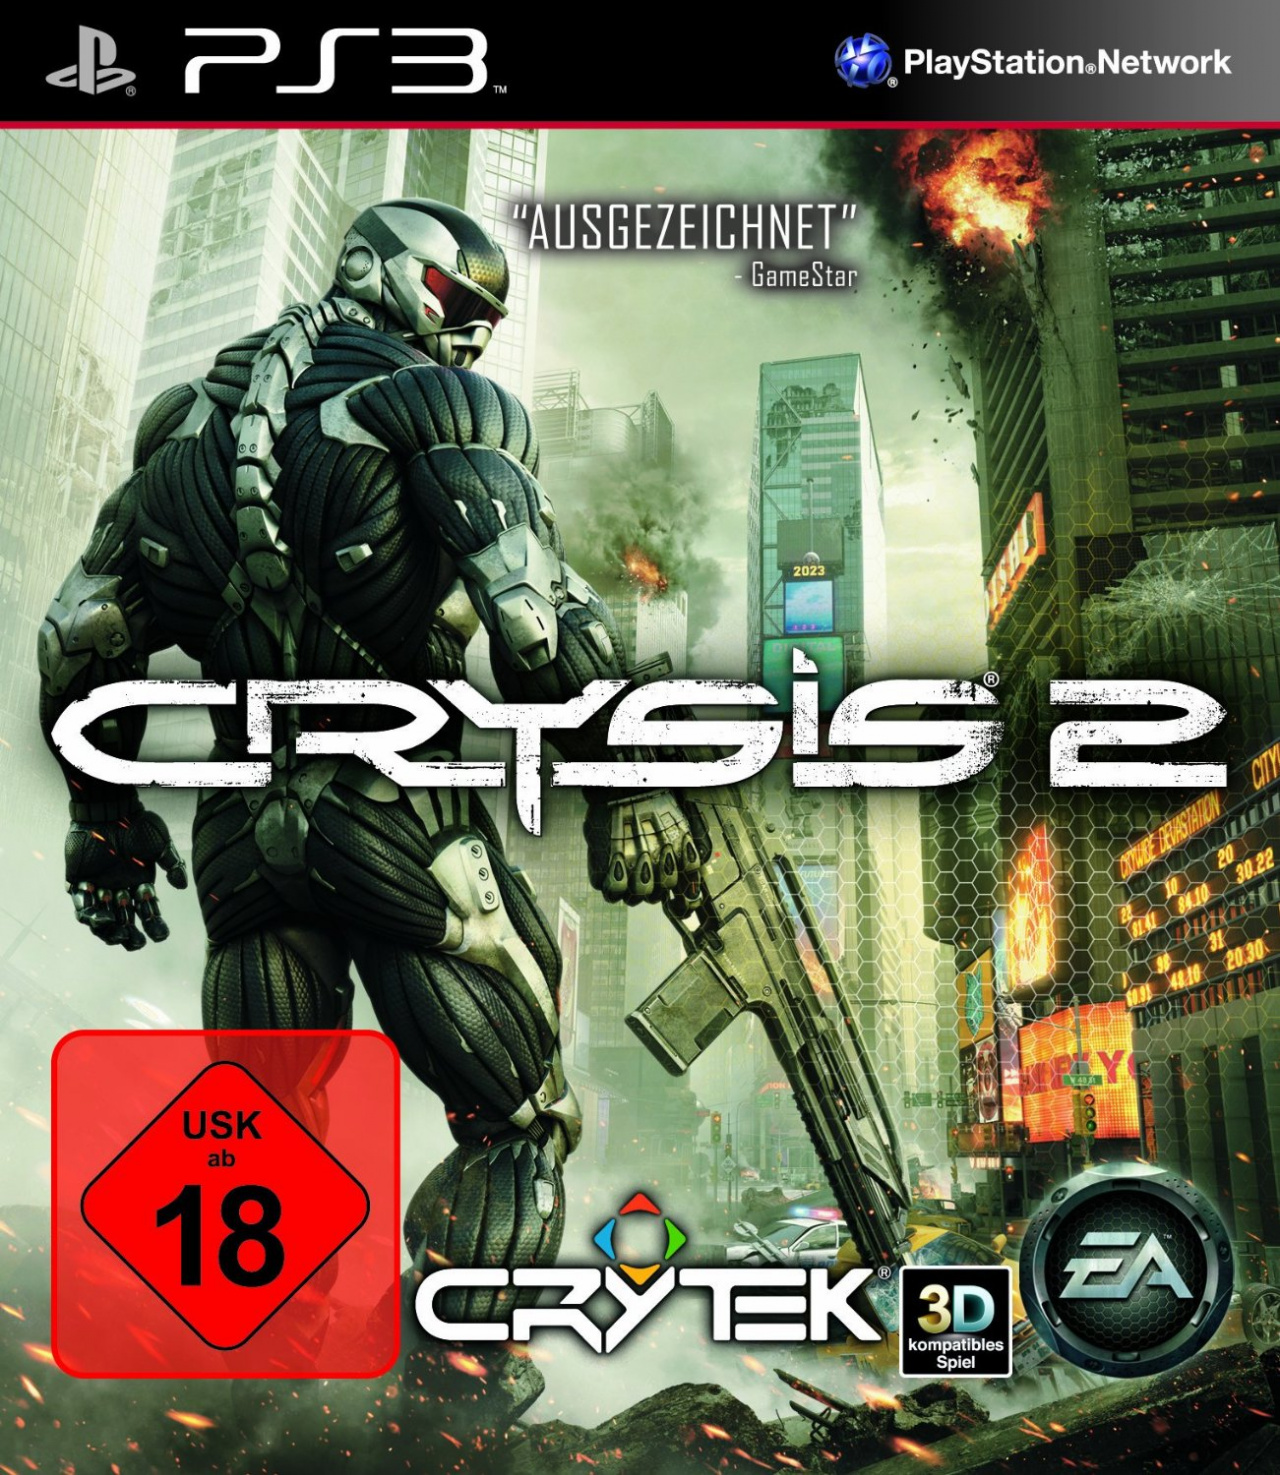 crysis 3 remastered ps4 download